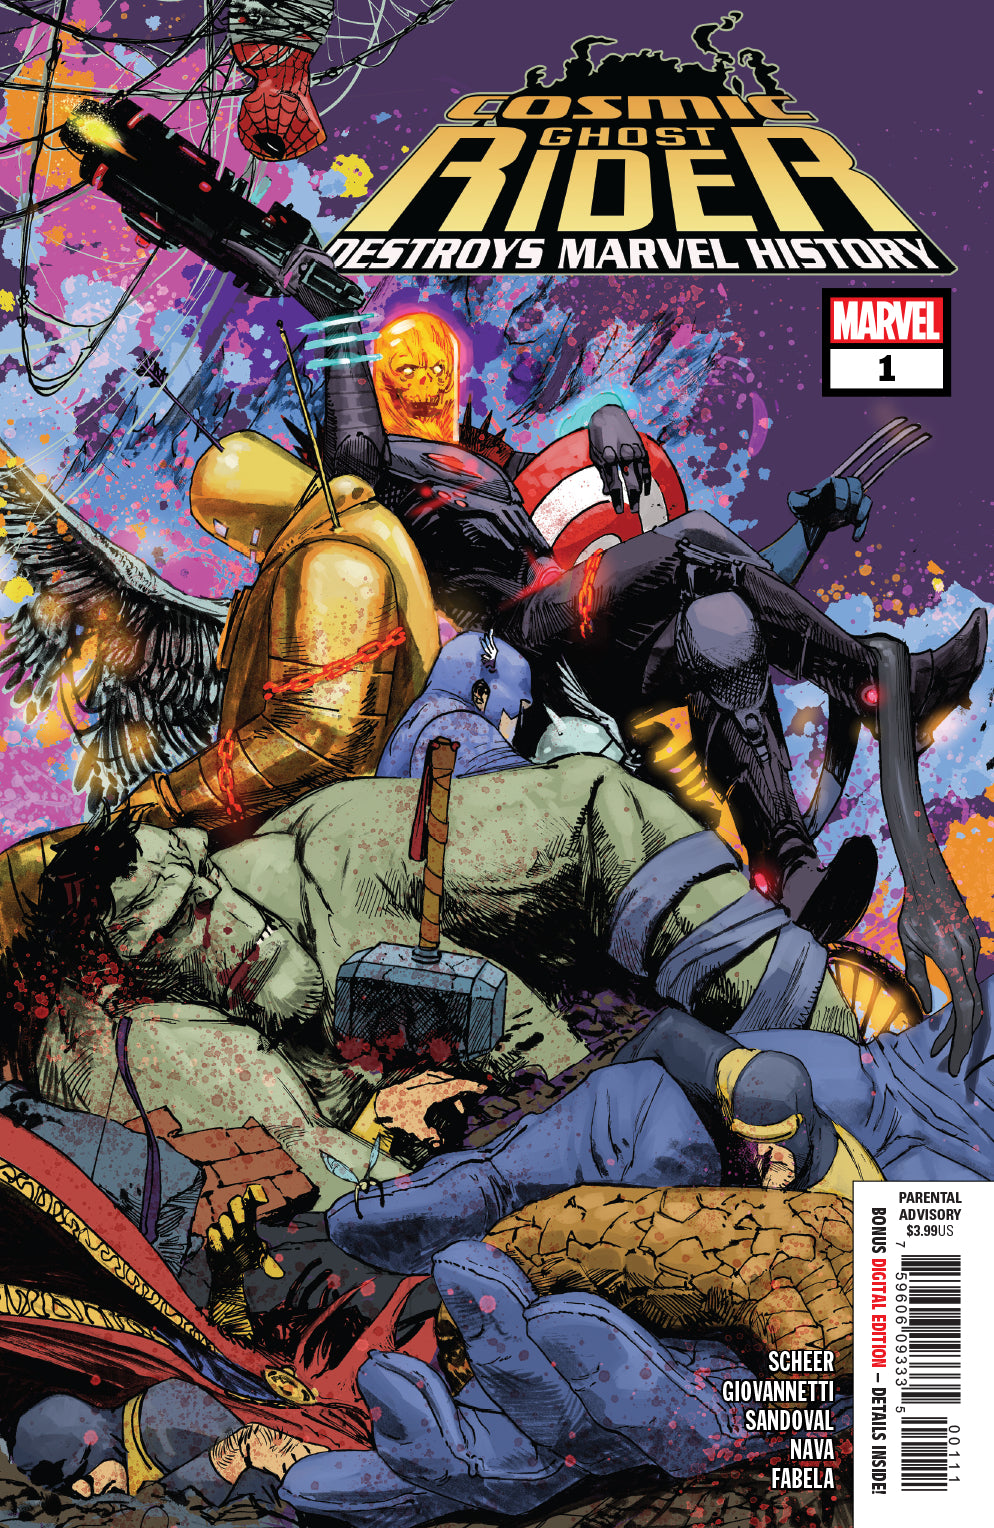 COSMIC GHOST RIDER DESTROYS MARVEL HISTORY #1 (OF 6) COVER